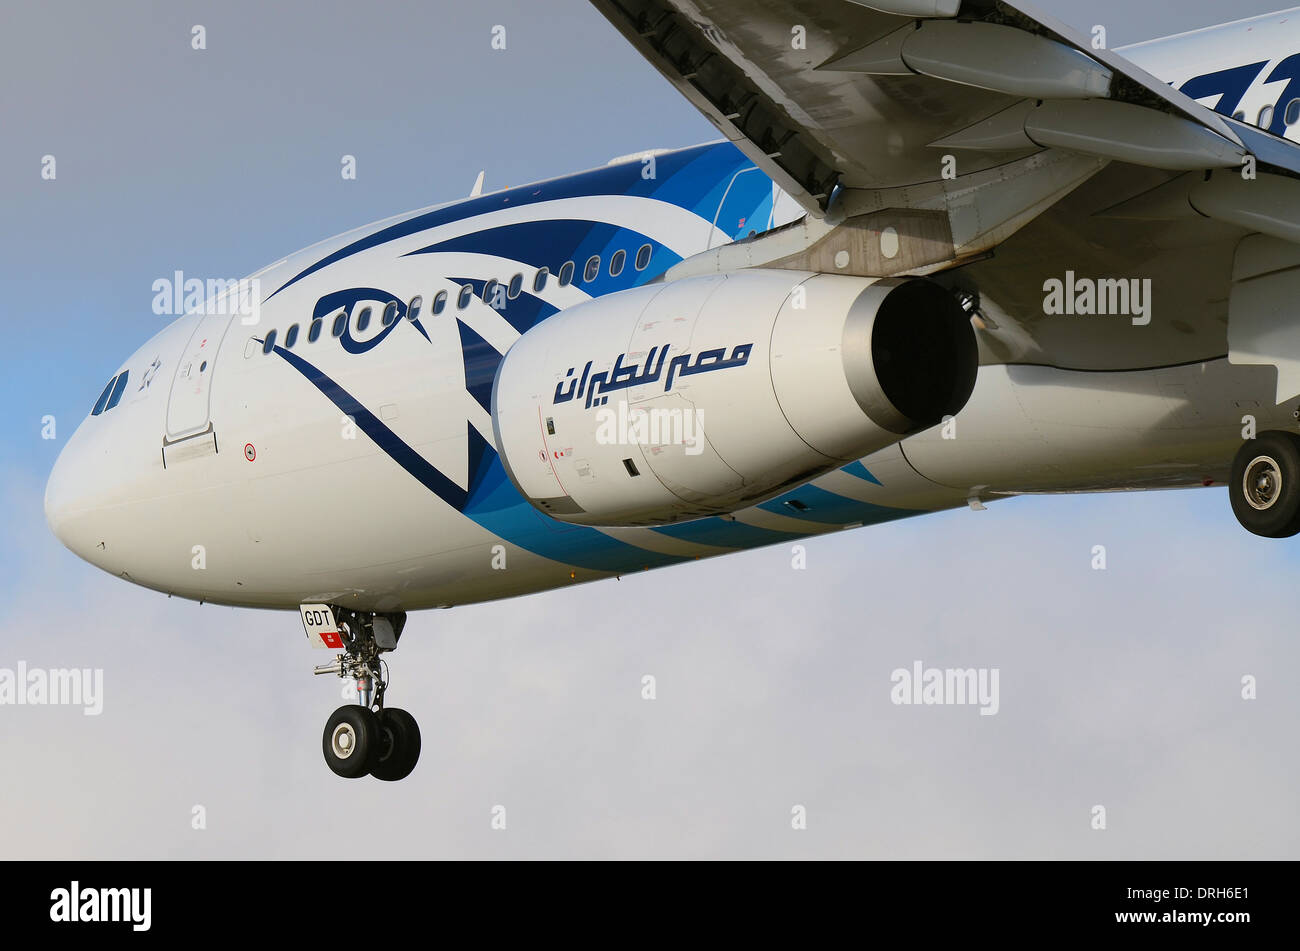 EgyptAir is the flag carrier airline of Egypt. Airbus A330 airliner jet plane landing at London Heathrow Airport, UK. Horus logo Stock Photo